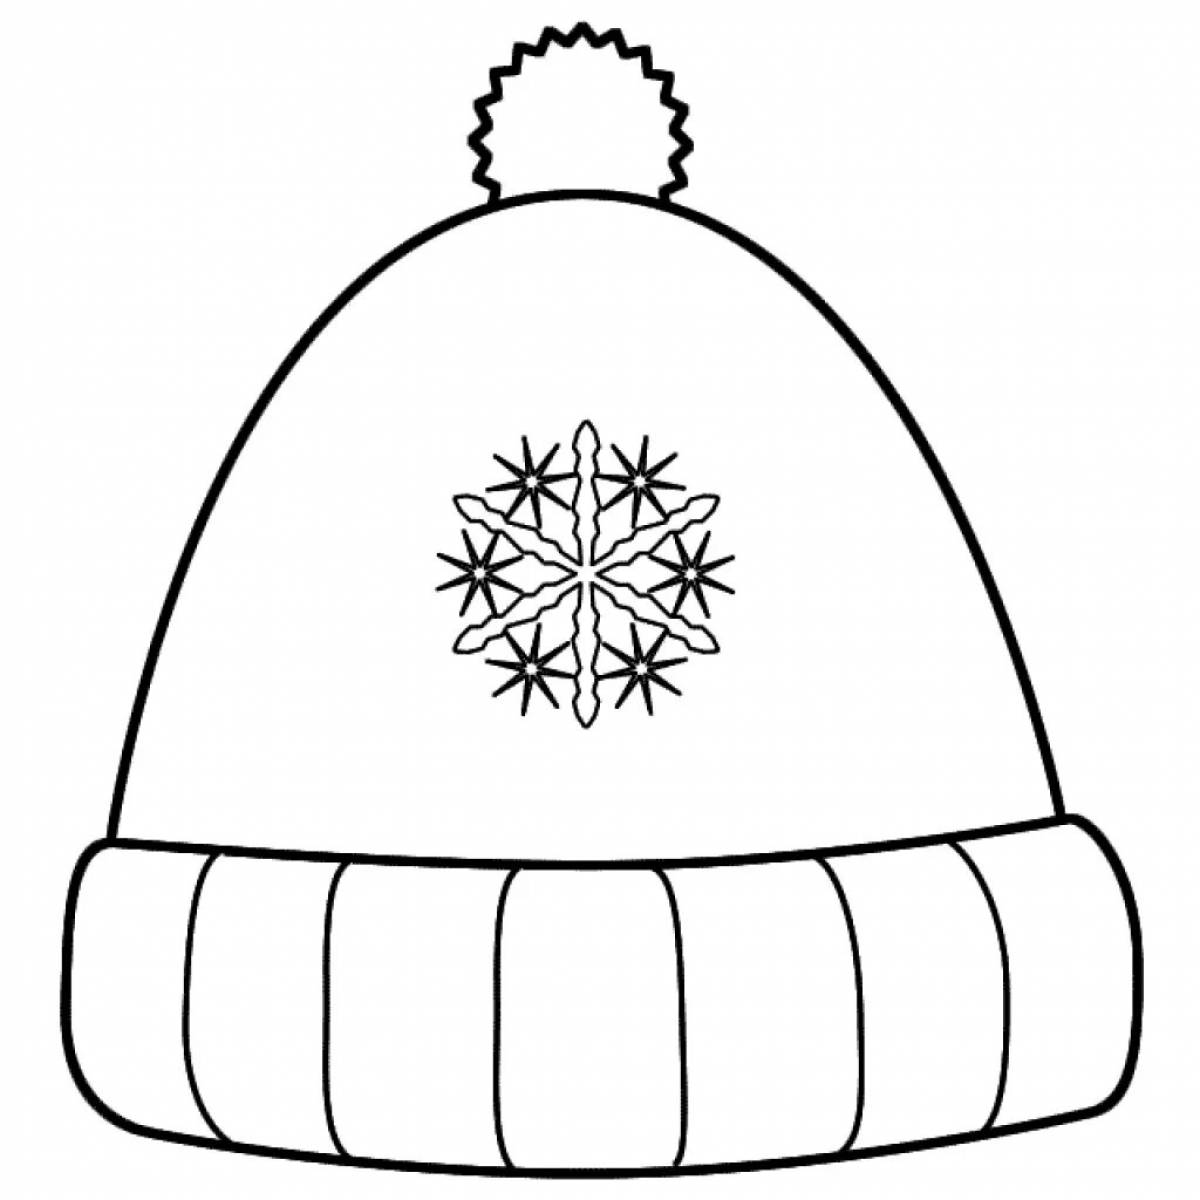 Coloring page elegant cap for children 2-3 years old